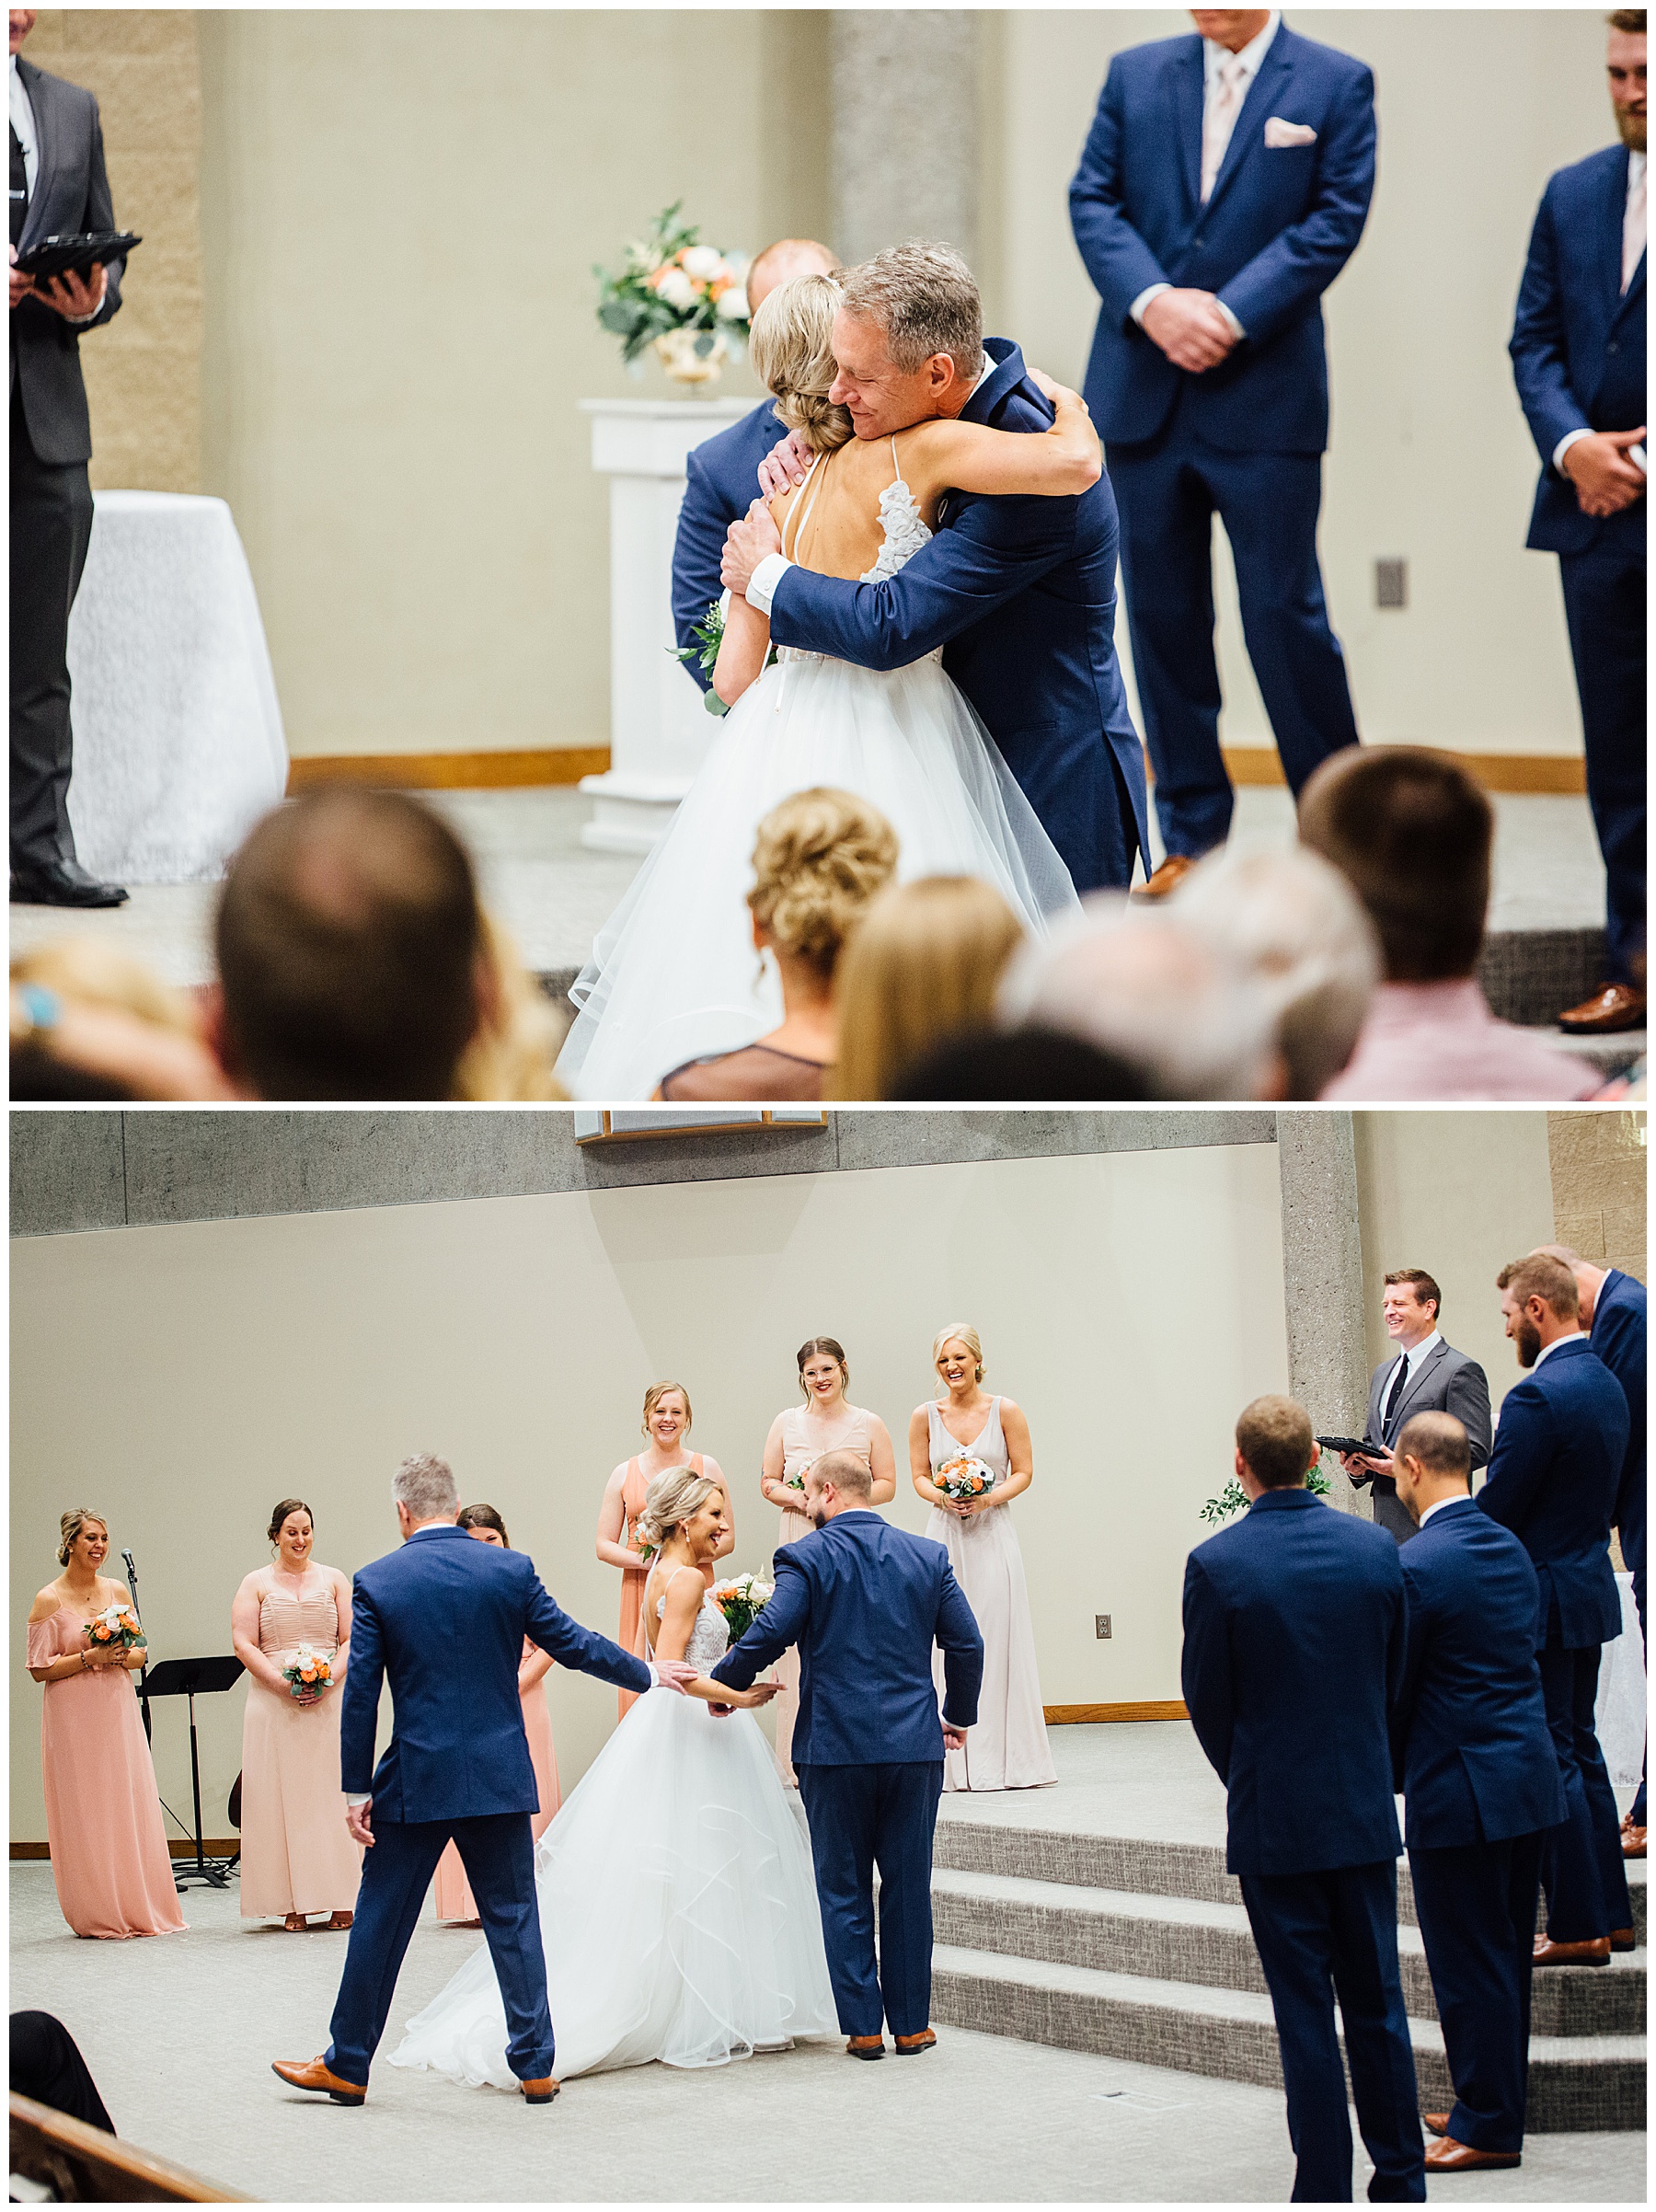 Father giving away his daughter at wedding